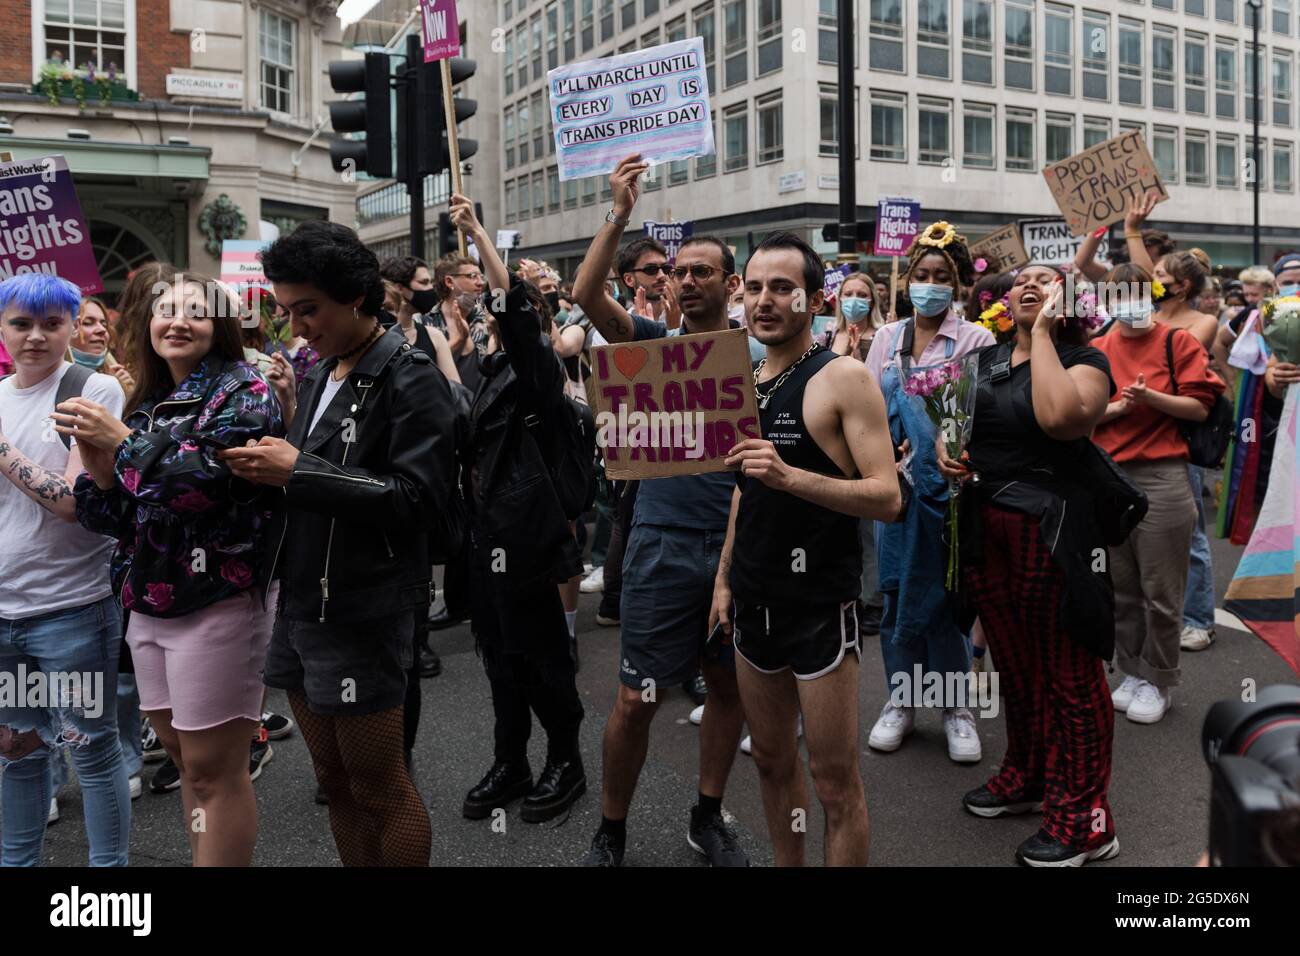 London, UK. 26th June, 2021. Transgender people and their supporters march through central London during the third Trans Pride protest march for equality. Protesters demand investment in trans healthcare, accessible bathroom provisions and prison facilities, an end to non-consensual surgeries on intersex children and ban on pseudoscientific conversion therapies. Credit: Wiktor Szymanowicz/Alamy Live News Stock Photo